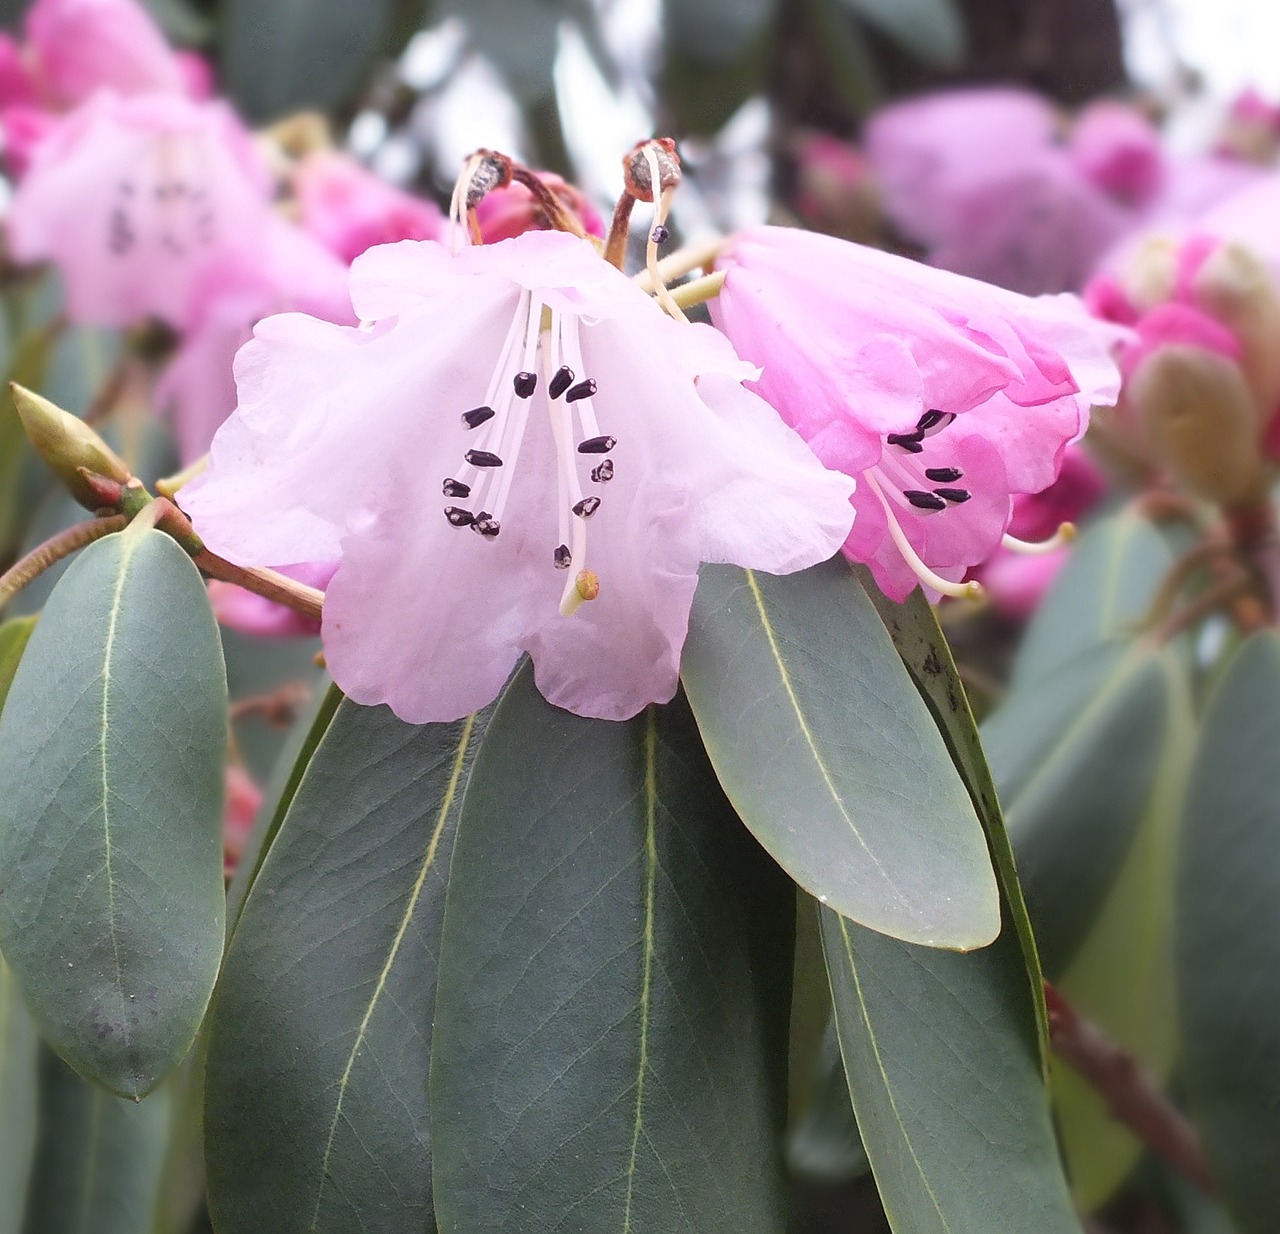 rhododendron flower bloom free photo